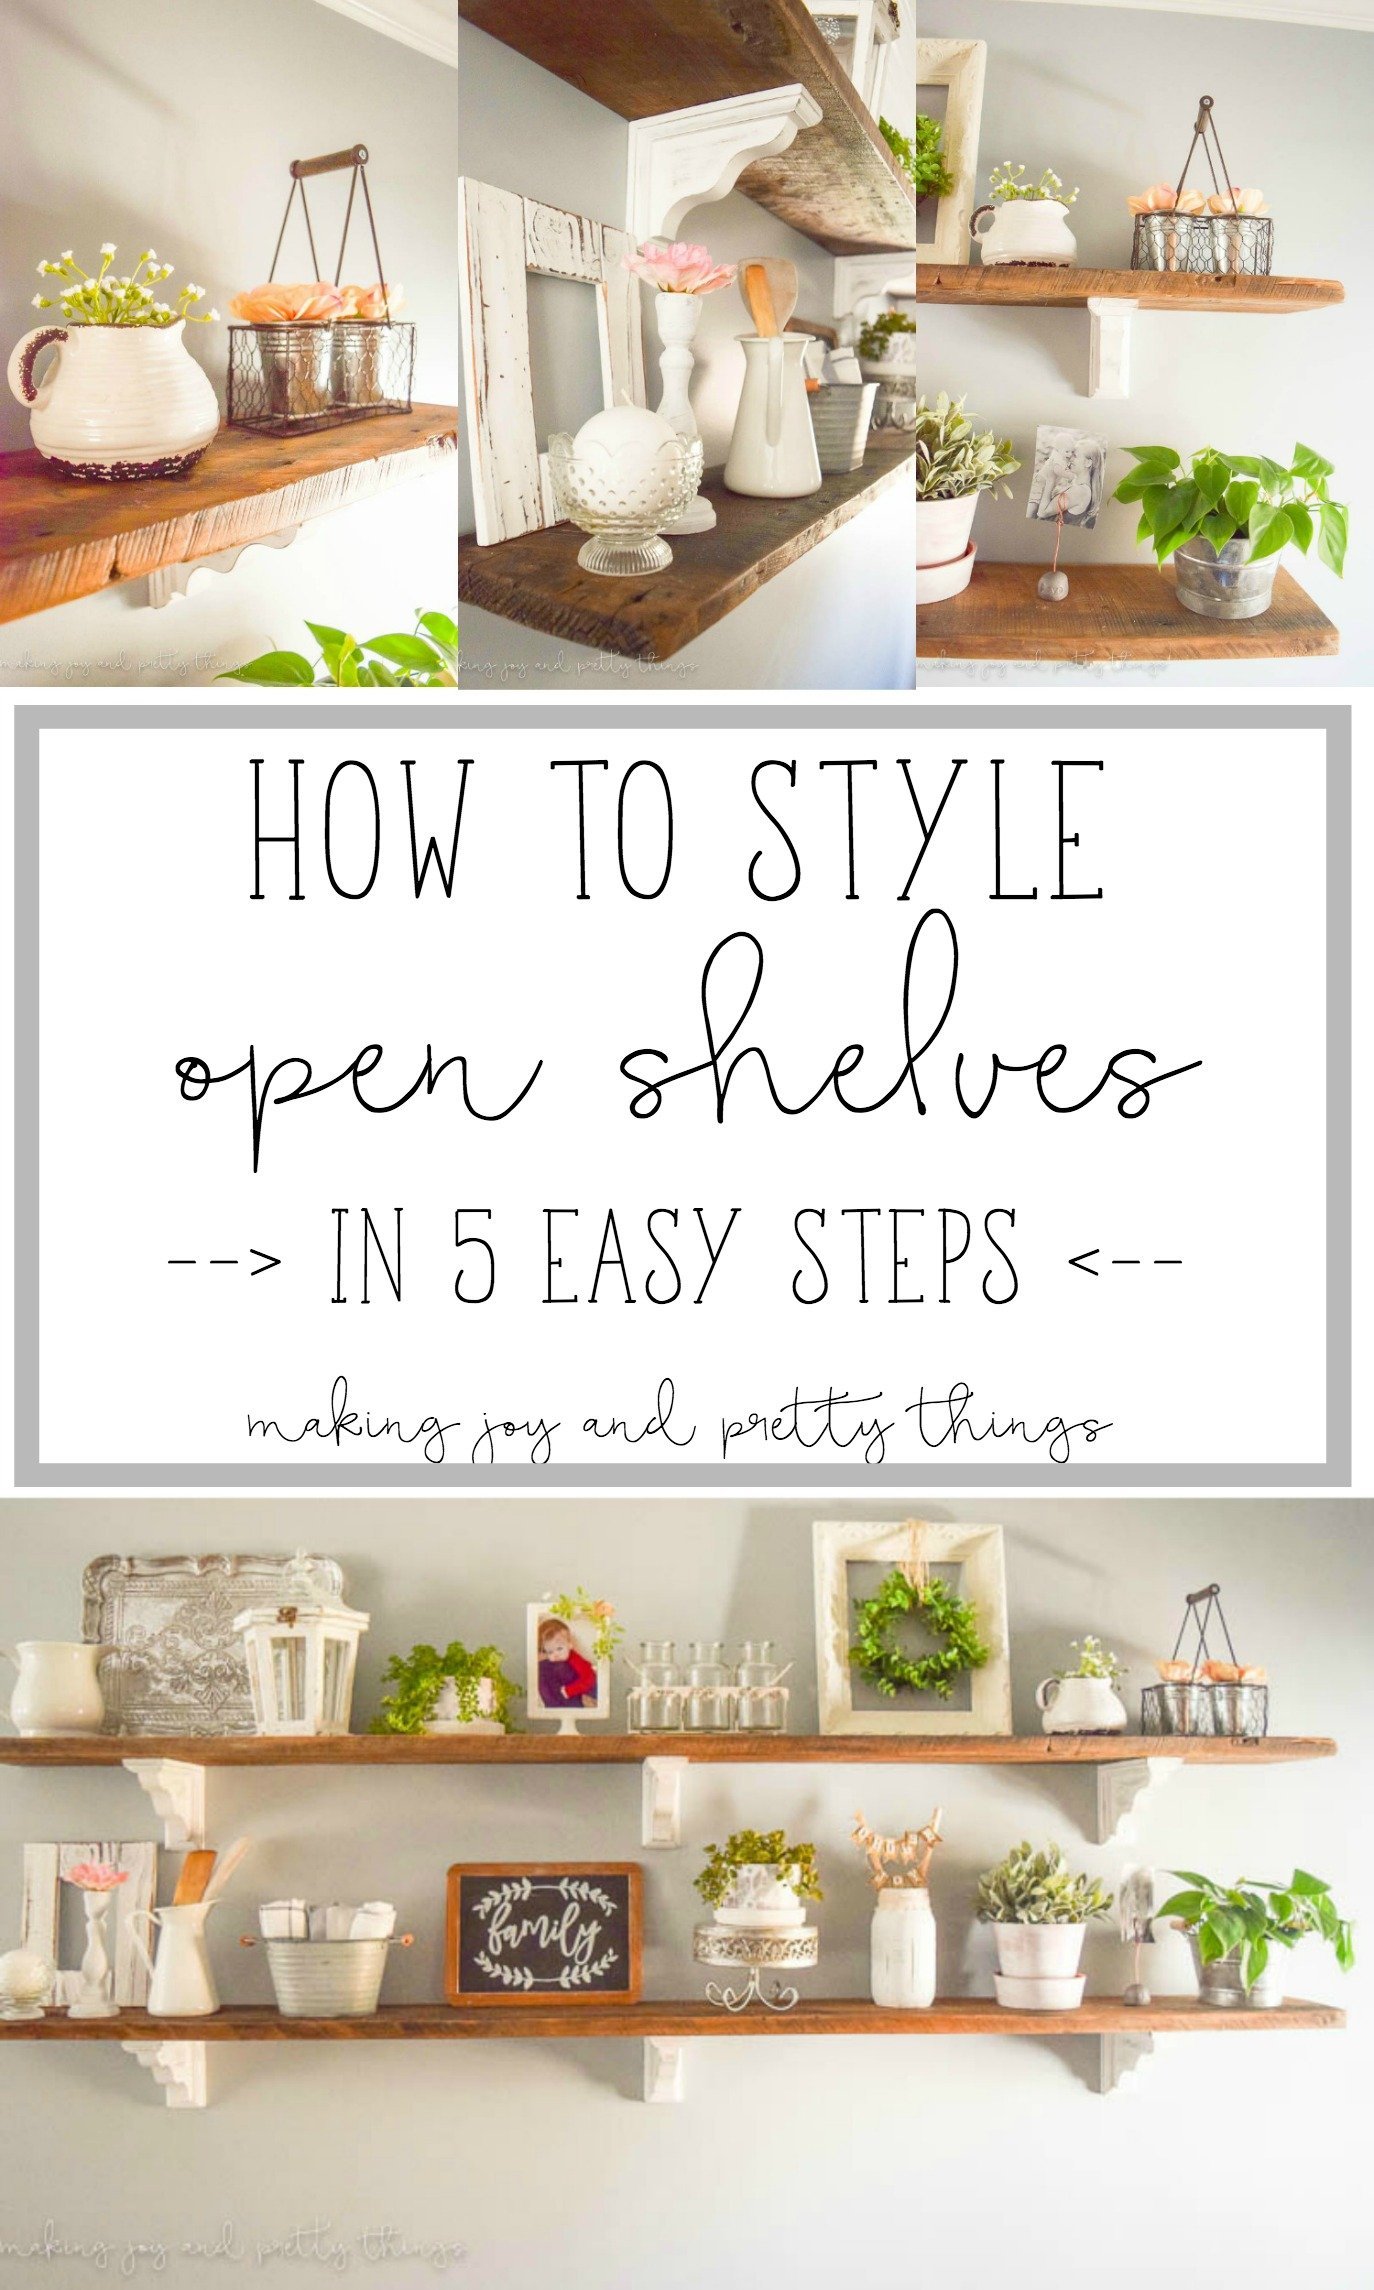 How to style open shelves in 5 easy steps! Perfect tips and inspiration to style your own shelves in whatever style you want.